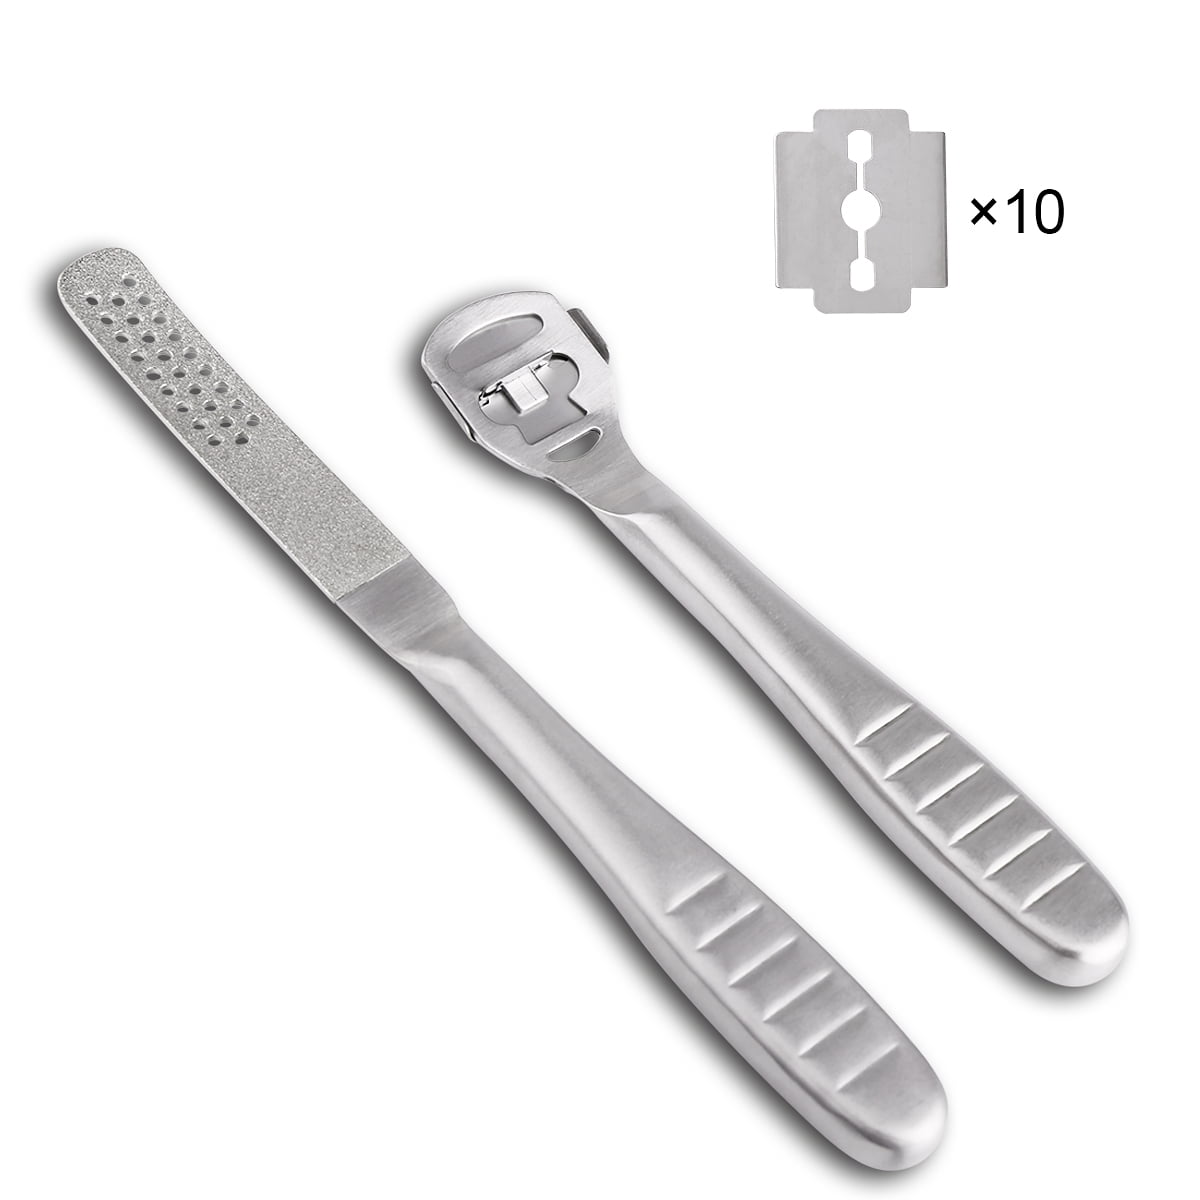 INFILILA Pedicure Foot File Callus Remover Foot Grater Professional  Stainless Steel Callus Remover for Feet Heel Scraper for Feet Foot Scrubber  for Dead Skin Foot File for Wet & Dry Feet 1pcs